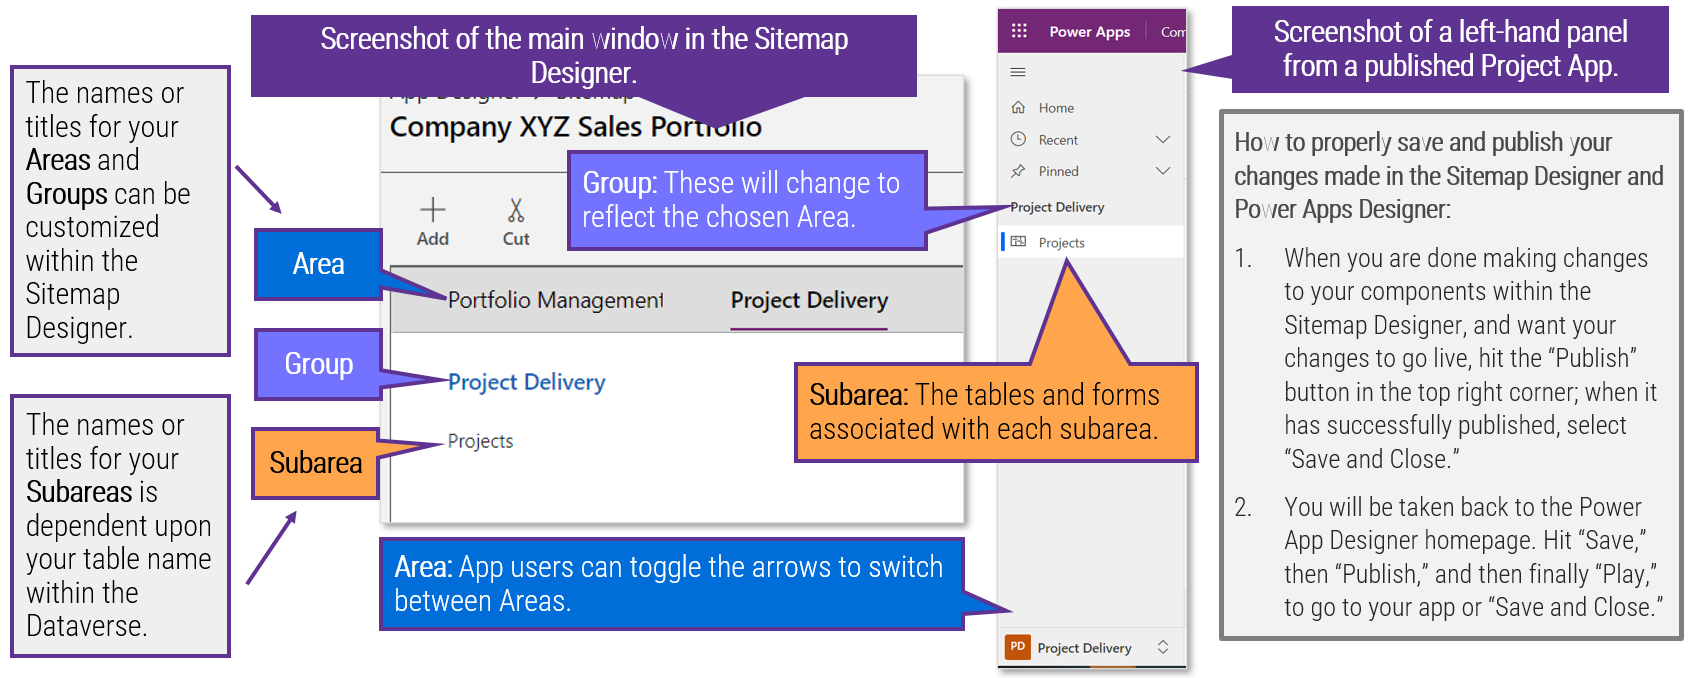 Screenshots of the main window in the 'Sitemap Designer' and of a left-hand panel from a published 'Project App'. There are notes defining the terms 'Area', 'Group', and 'Subarea' in the context of the screenshot.